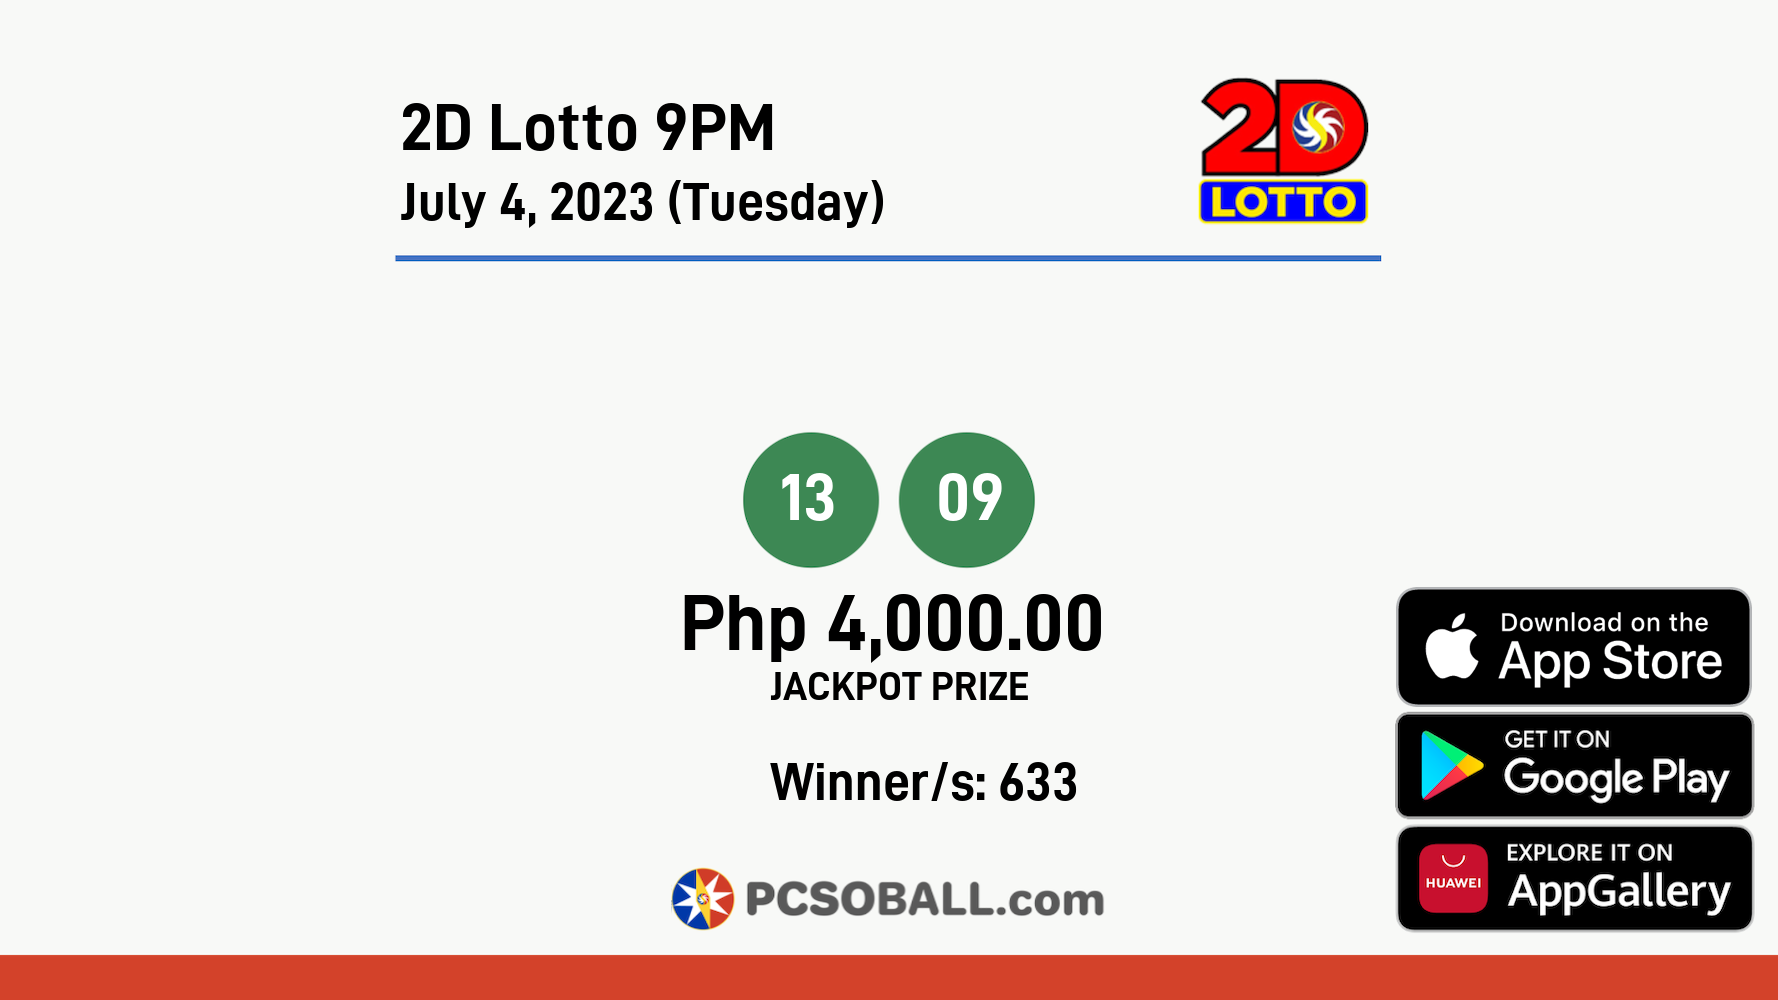 2D Lotto 9PM July 4, 2023 (Tuesday) Result